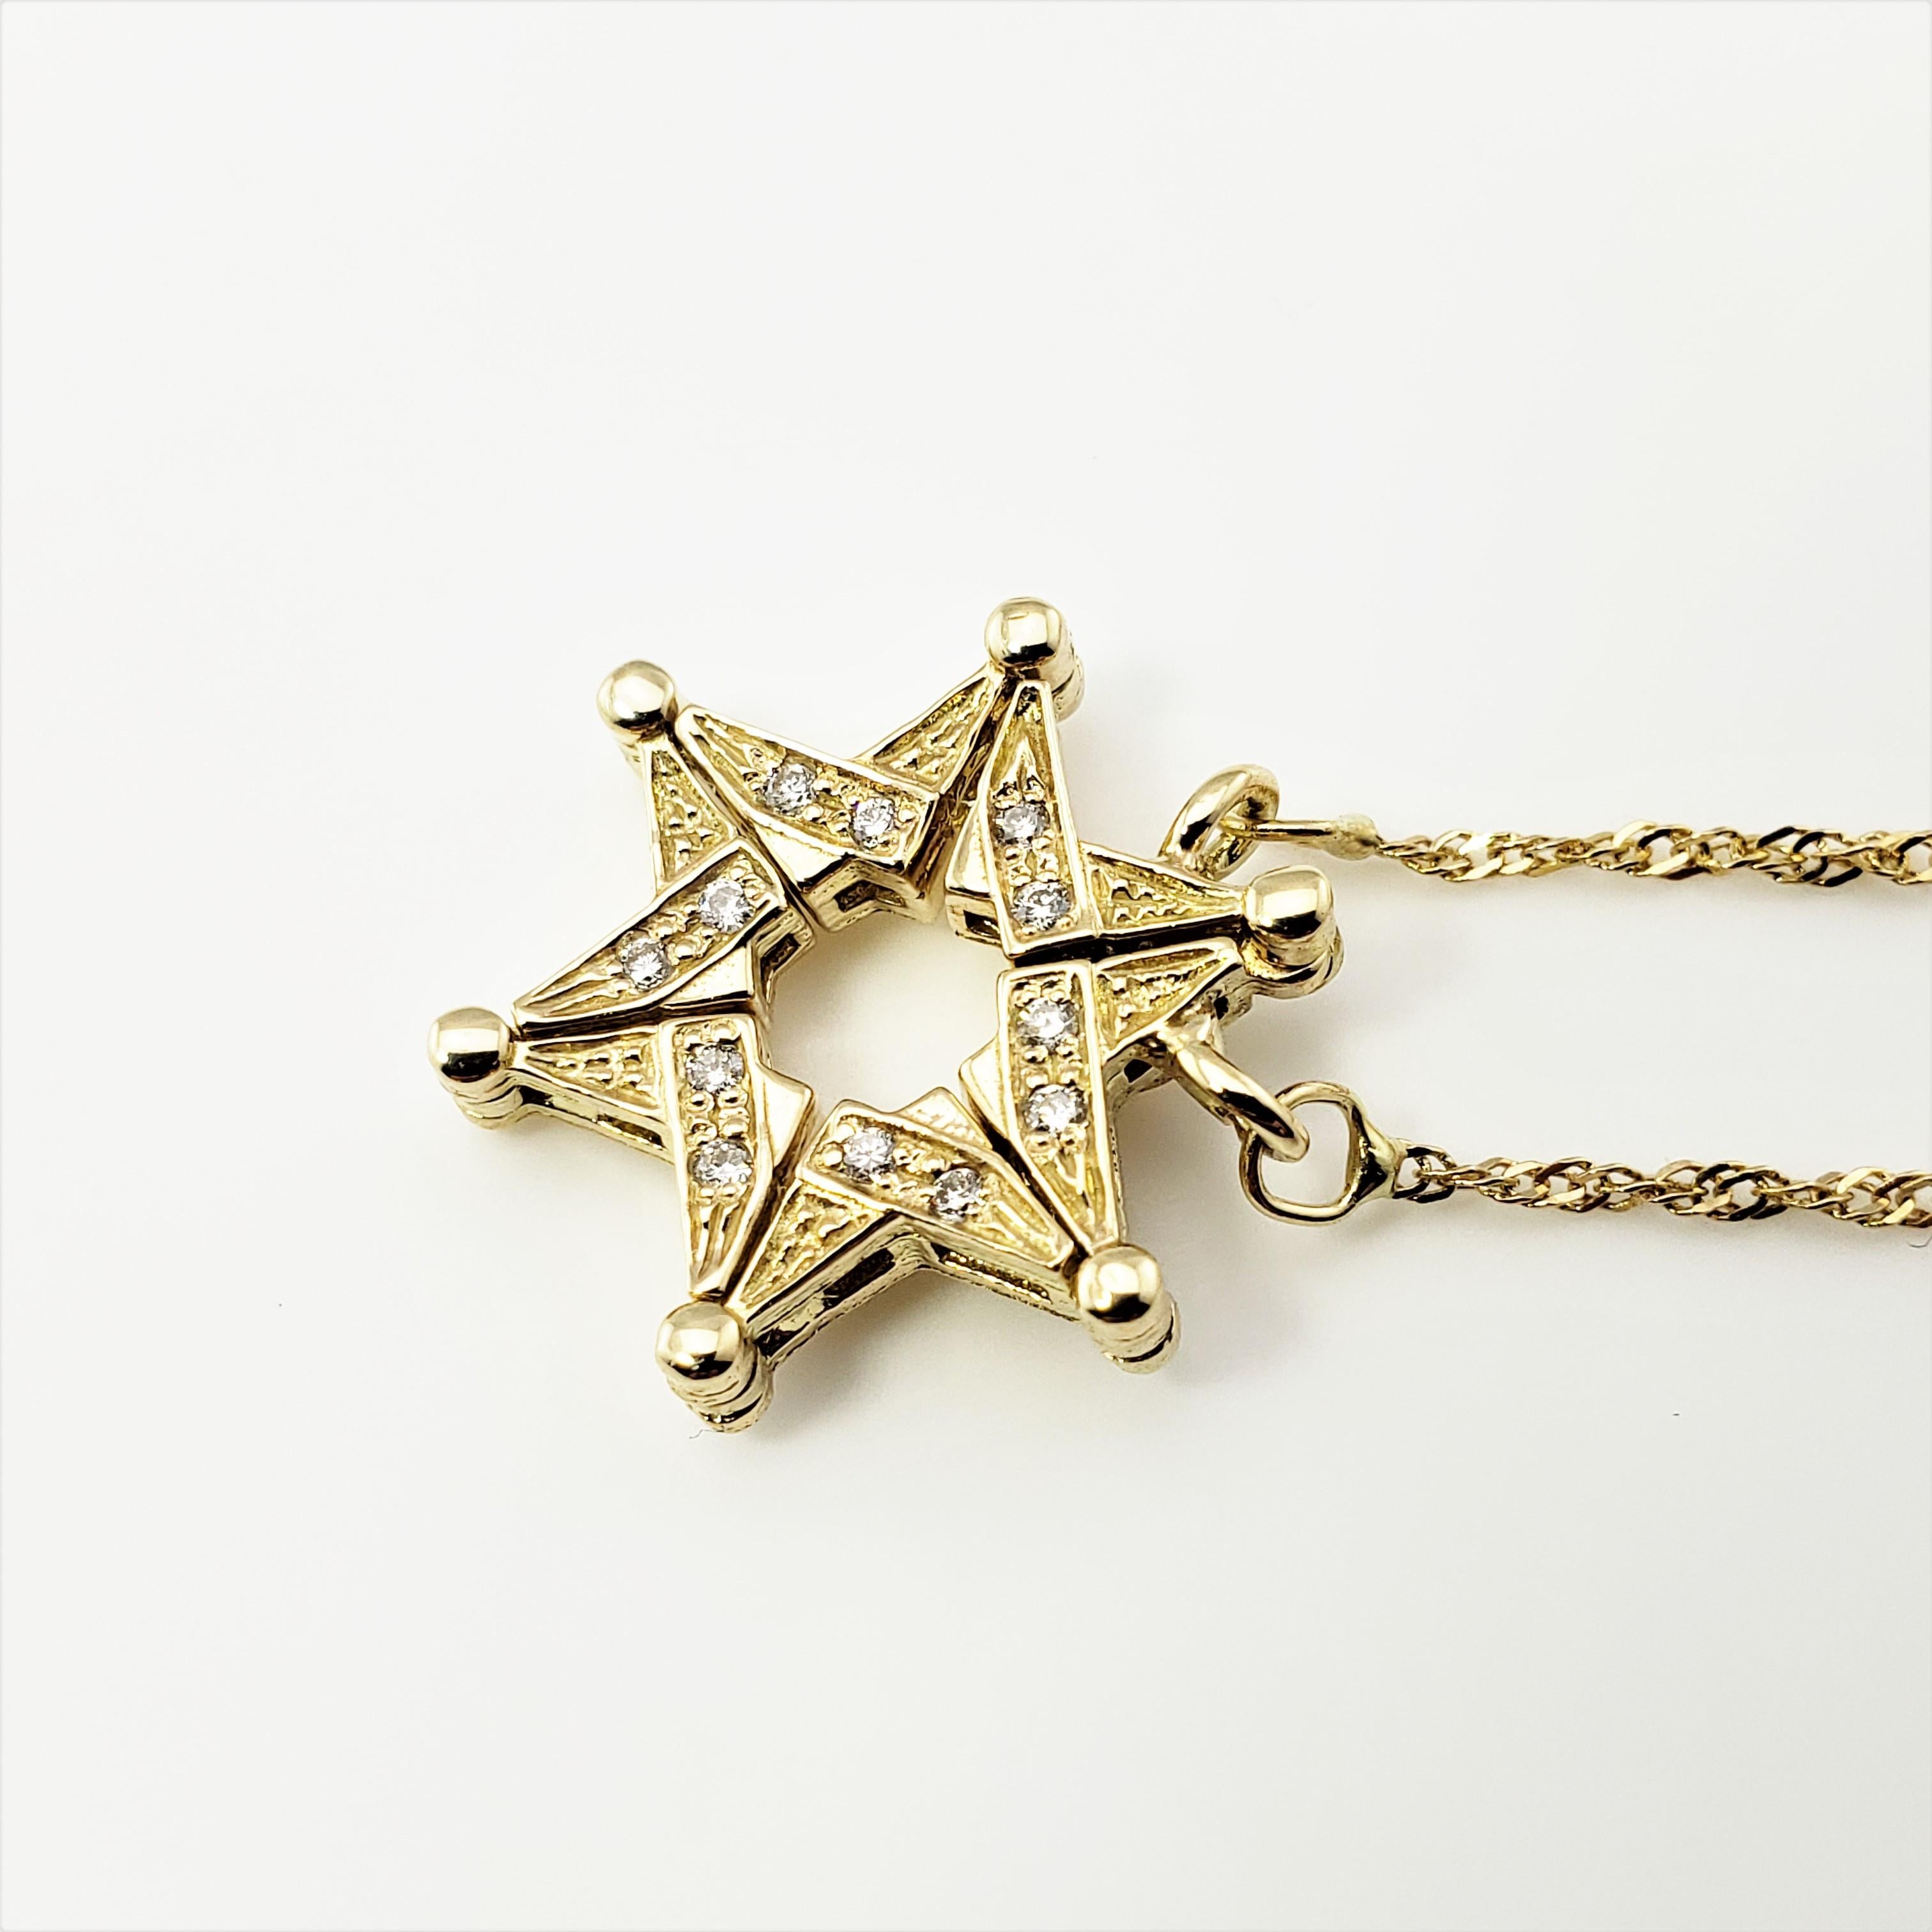 Convertible Magnetic 14 Karat Yellow Gold and Diamond Star of David Pendant Necklace-

This lovely convertible magnetic pendant features the Star of David accented with 12 round brilliant cut diamonds set in 14K yellow gold.  Suspended from a